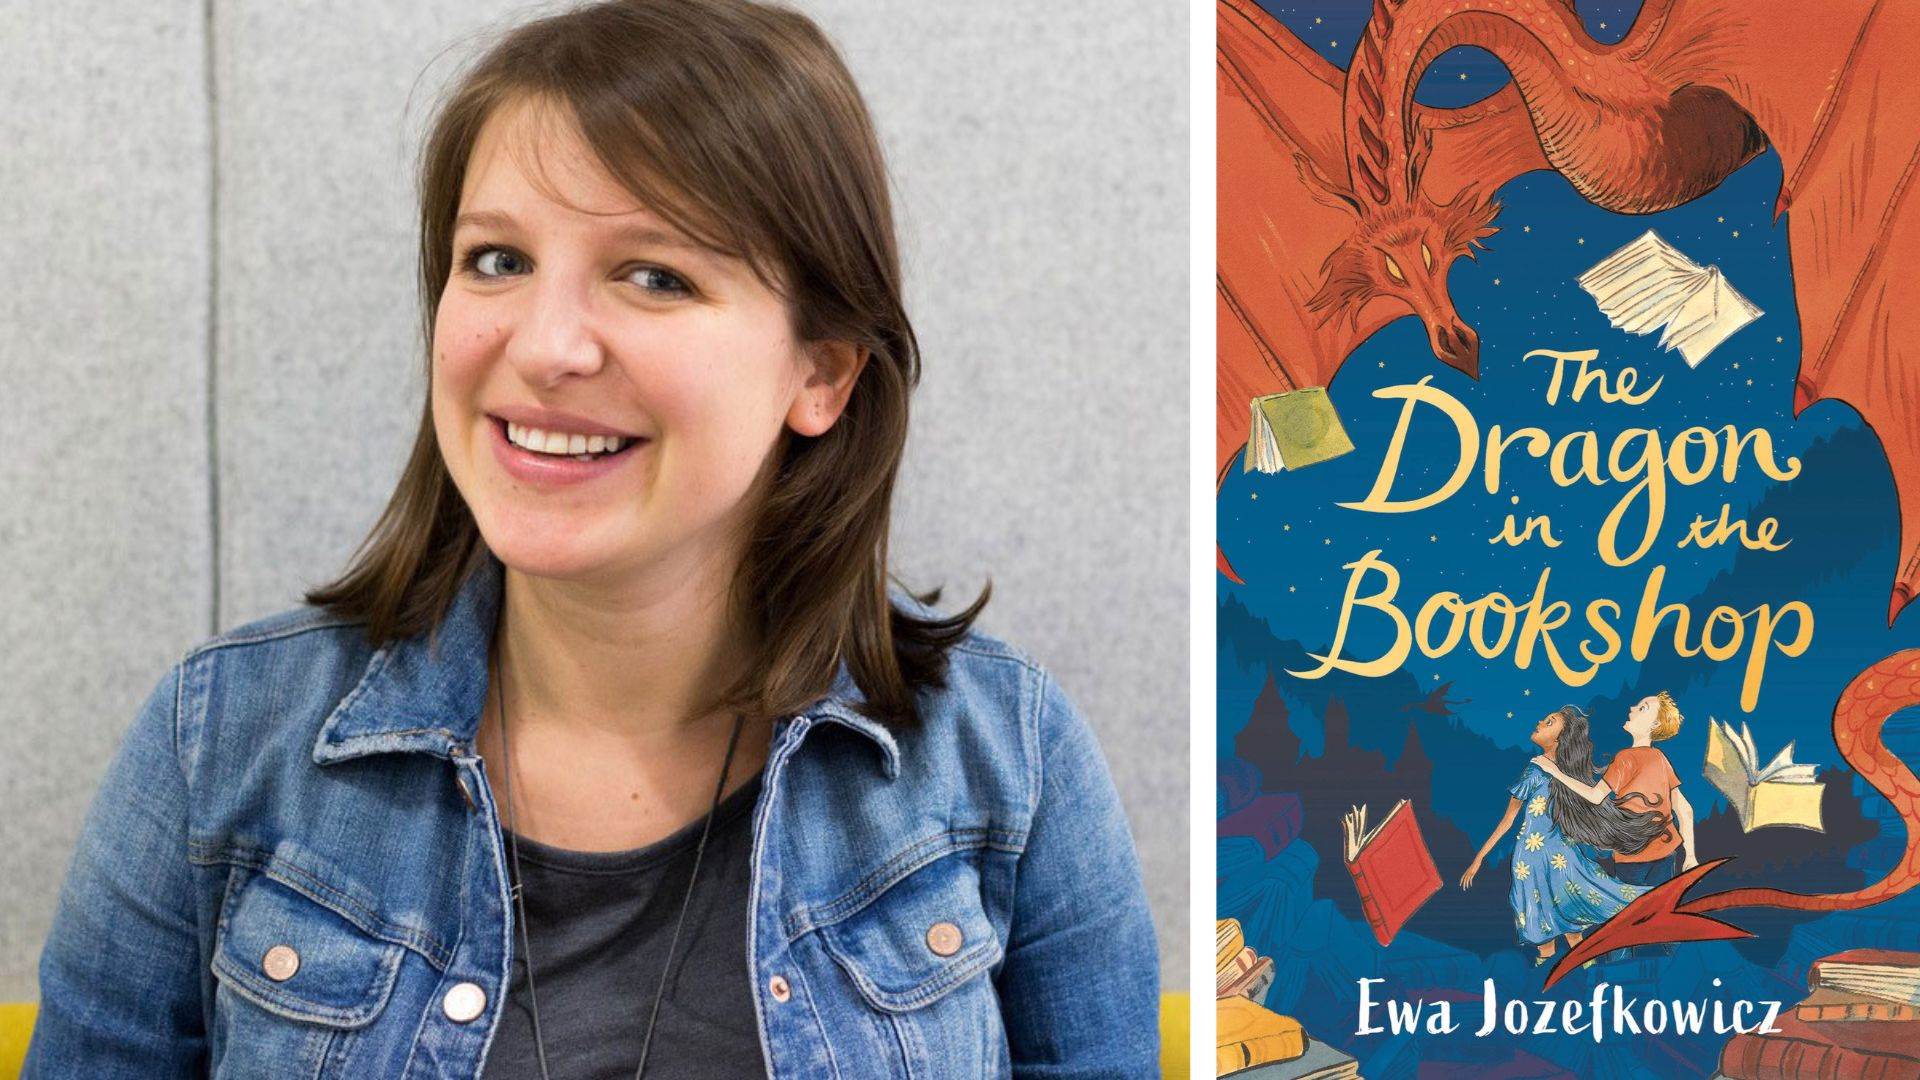 Author Ewa Jozefkowicz and the cover of The Dragon in the Bookshop